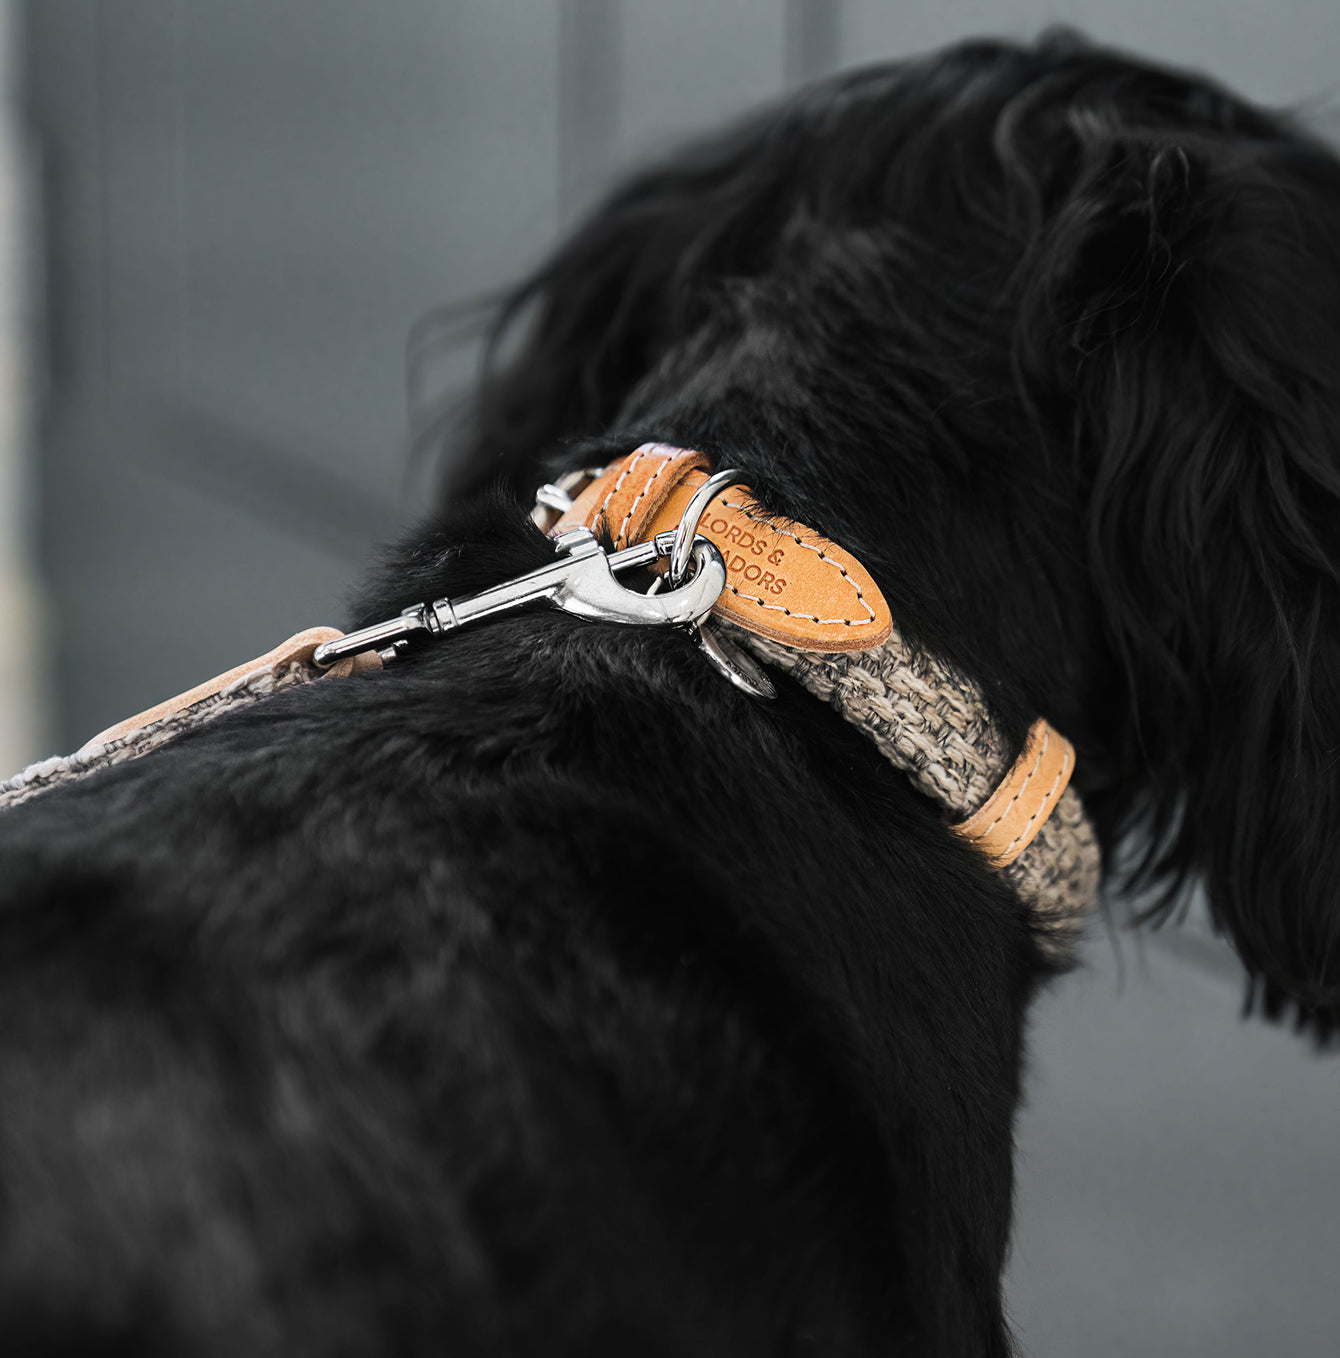 Discover dog walking luxury with our handcrafted Italian Herdwick dog lead in beautiful pebble with woven light grey fabric! The perfect lead for dogs available now at Lords & Labradors 